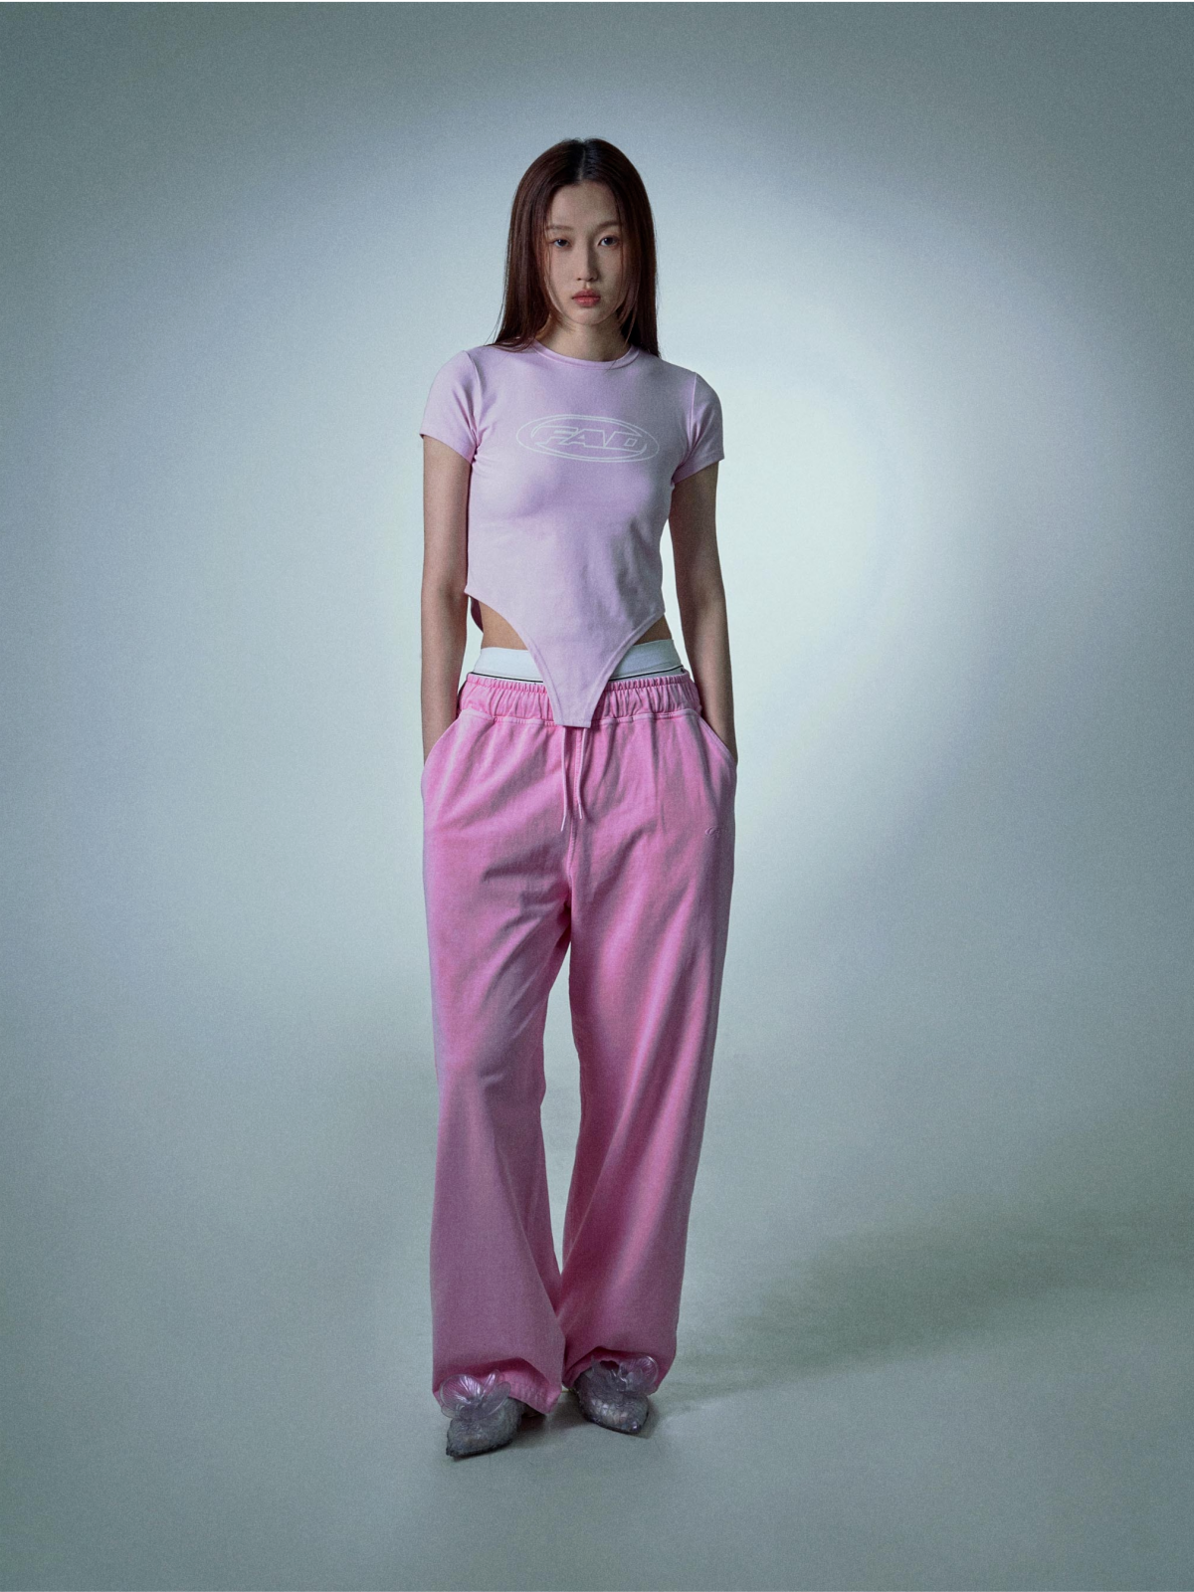 [FAD] DYED JOGGER PANTS (PINK)